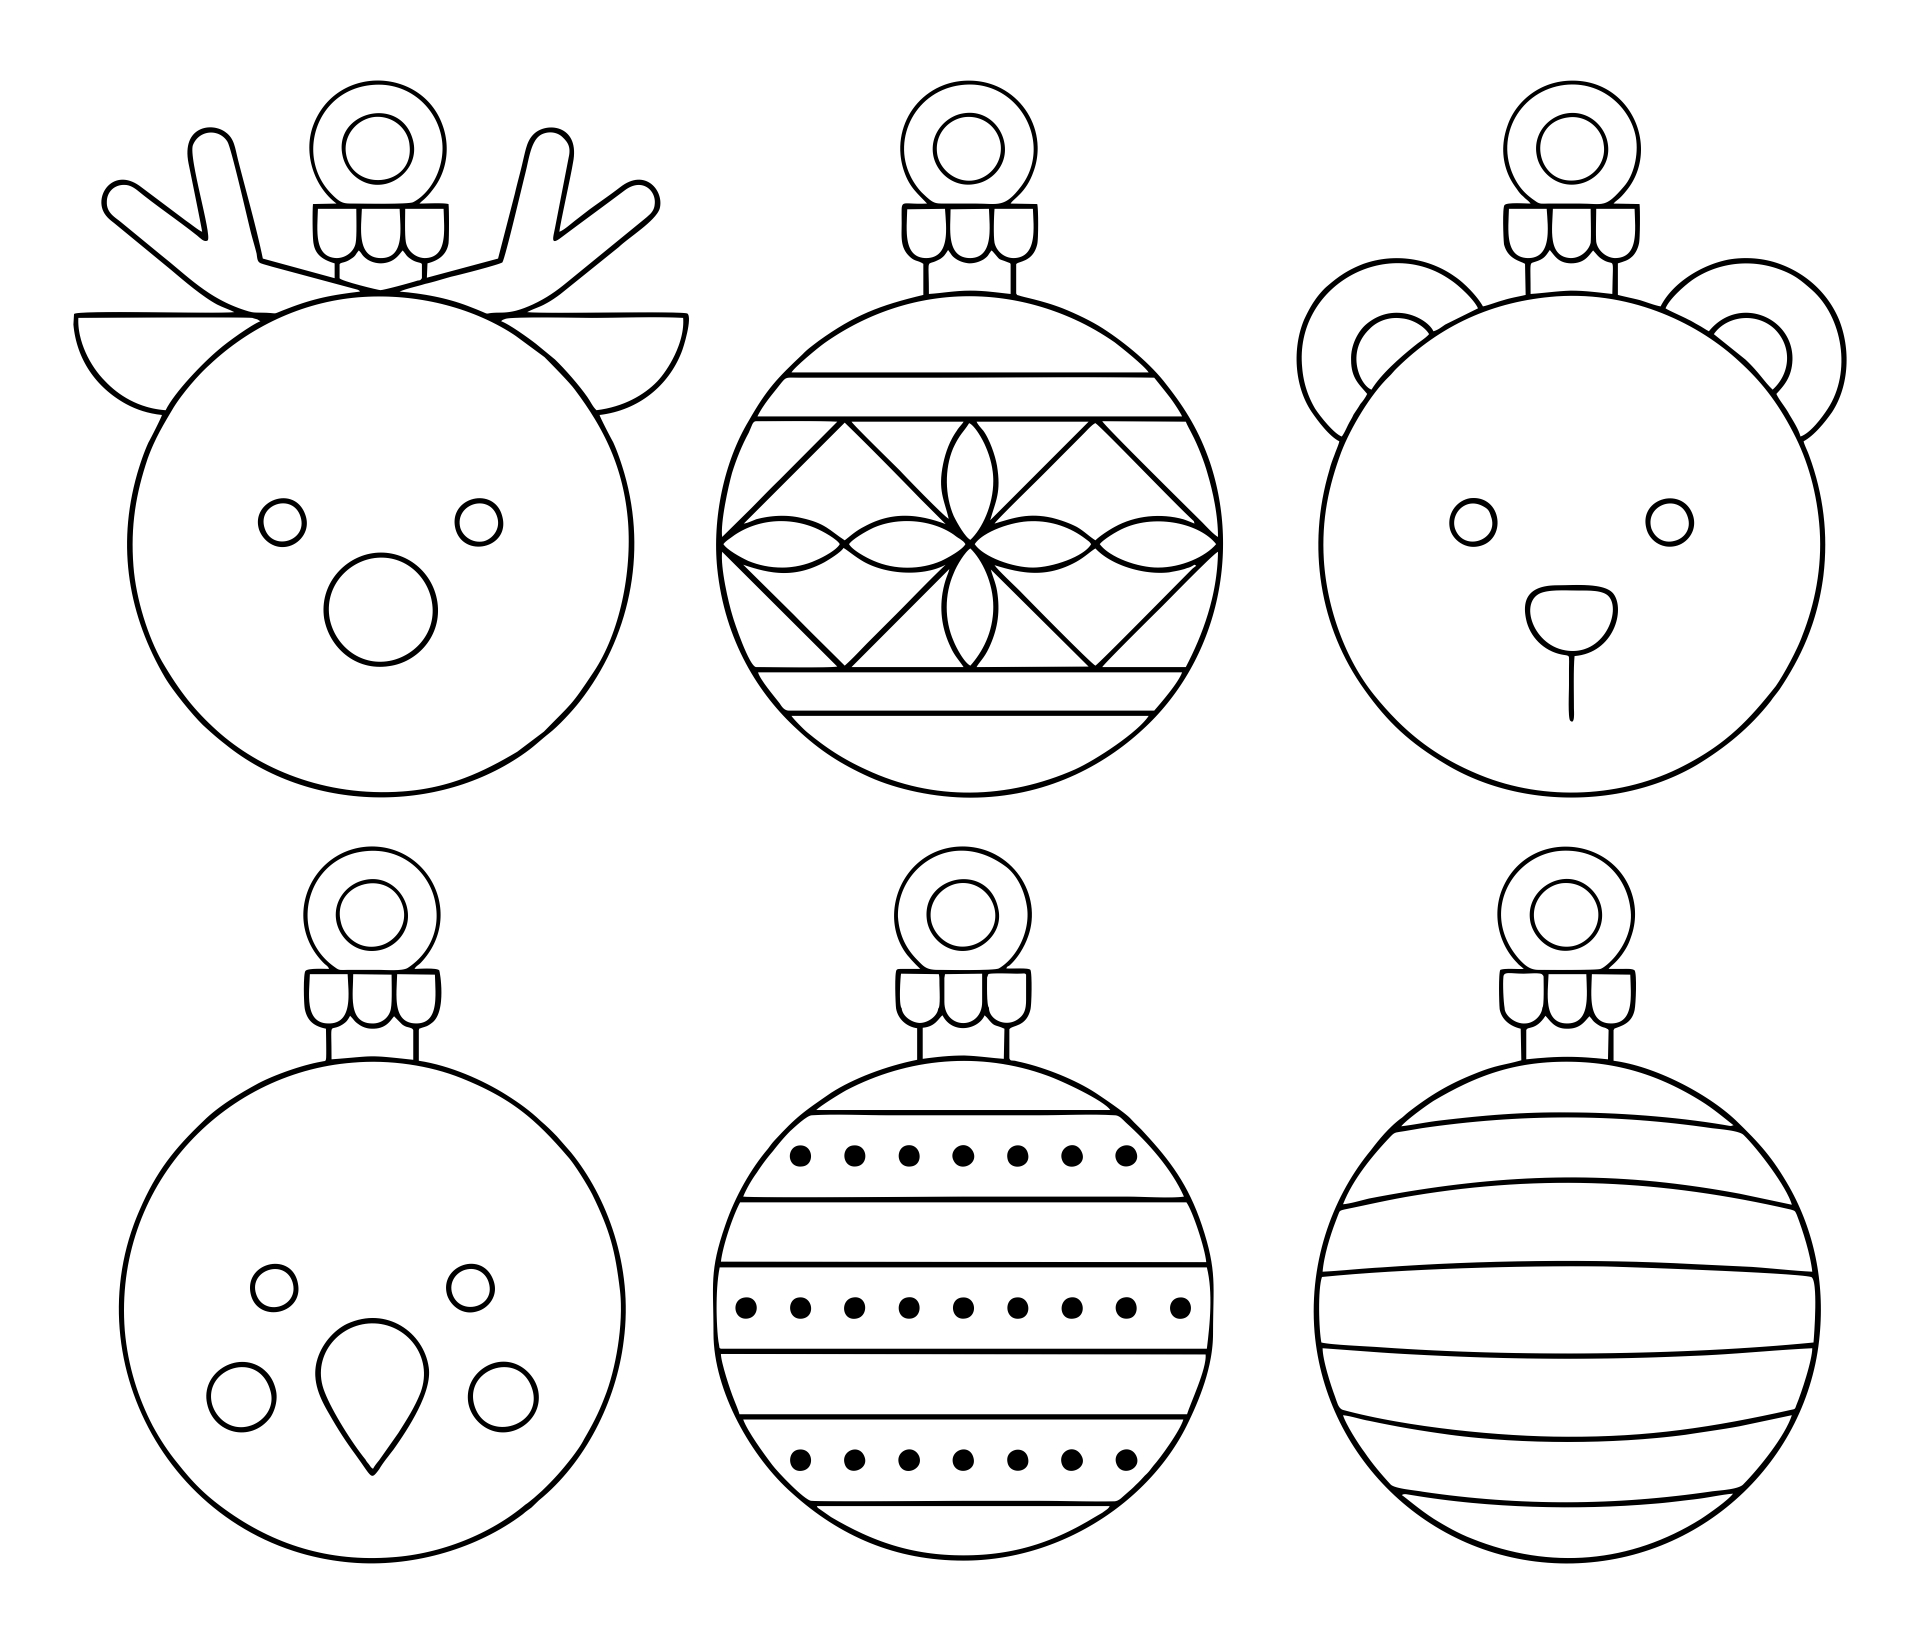 15 Best Free Printable Christmas Ornament Templates PDF For Free At 